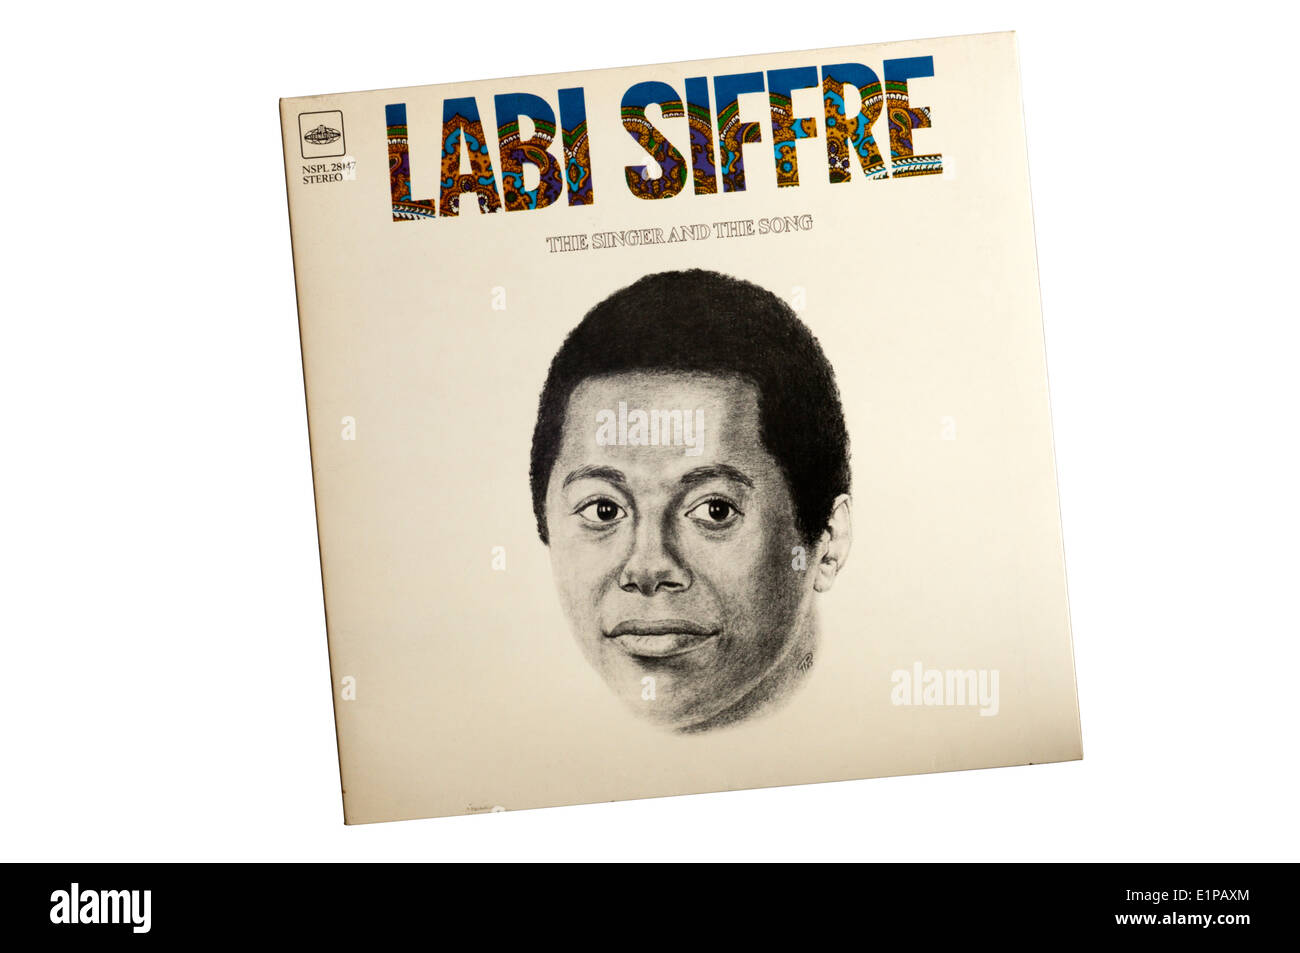 The Singer And The Song is the 1971 second album by Labi Siffre. Stock Photo